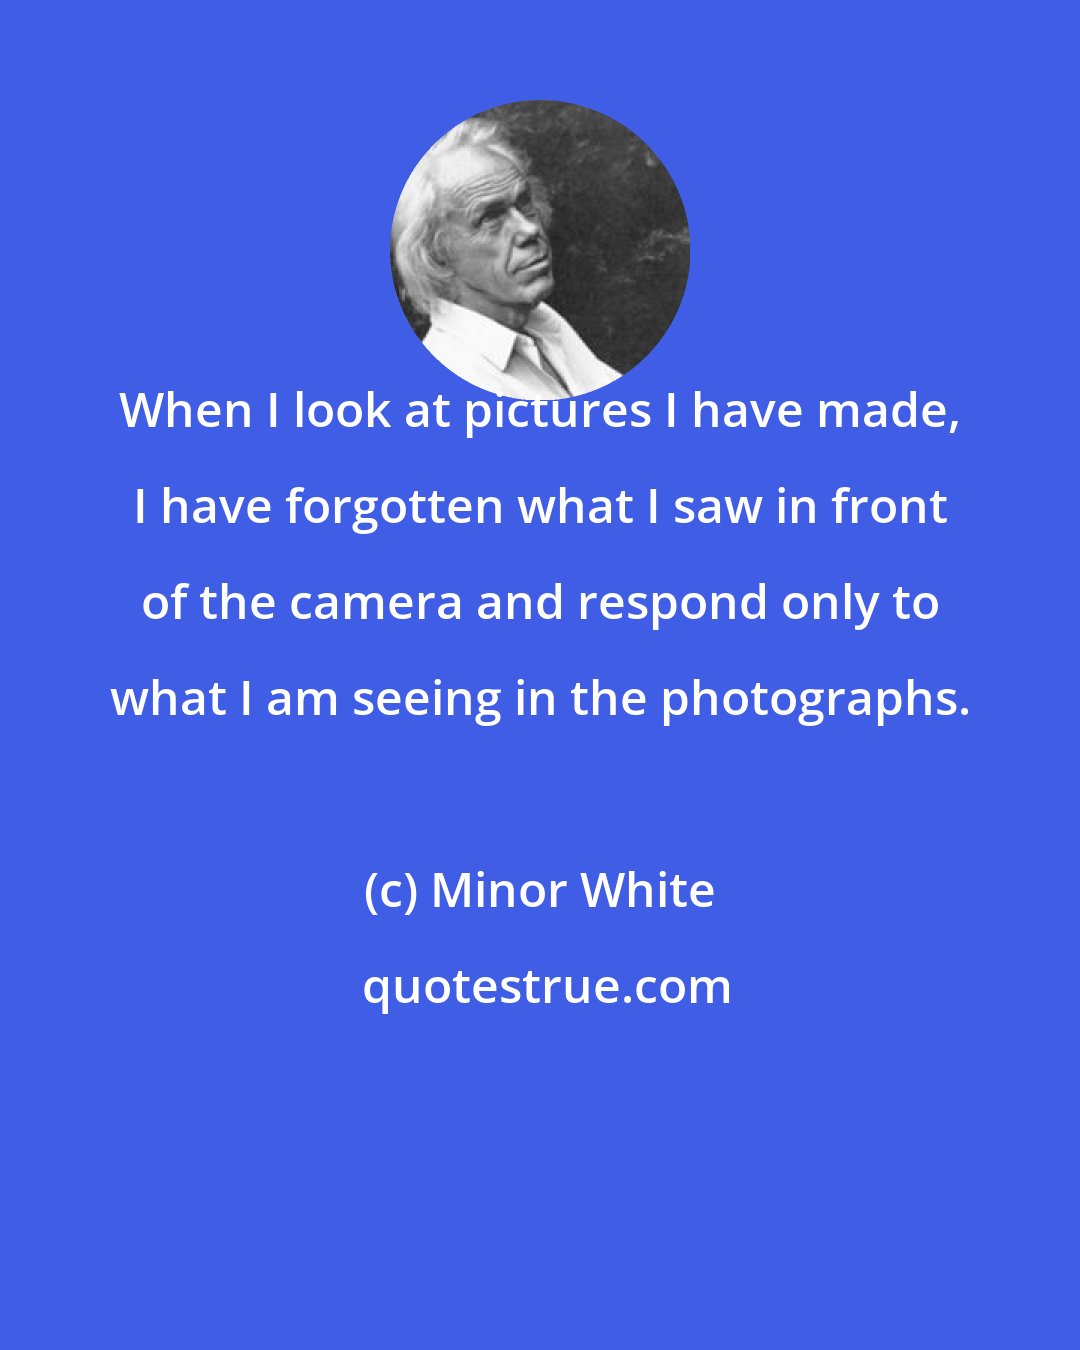 Minor White: When I look at pictures I have made, I have forgotten what I saw in front of the camera and respond only to what I am seeing in the photographs.